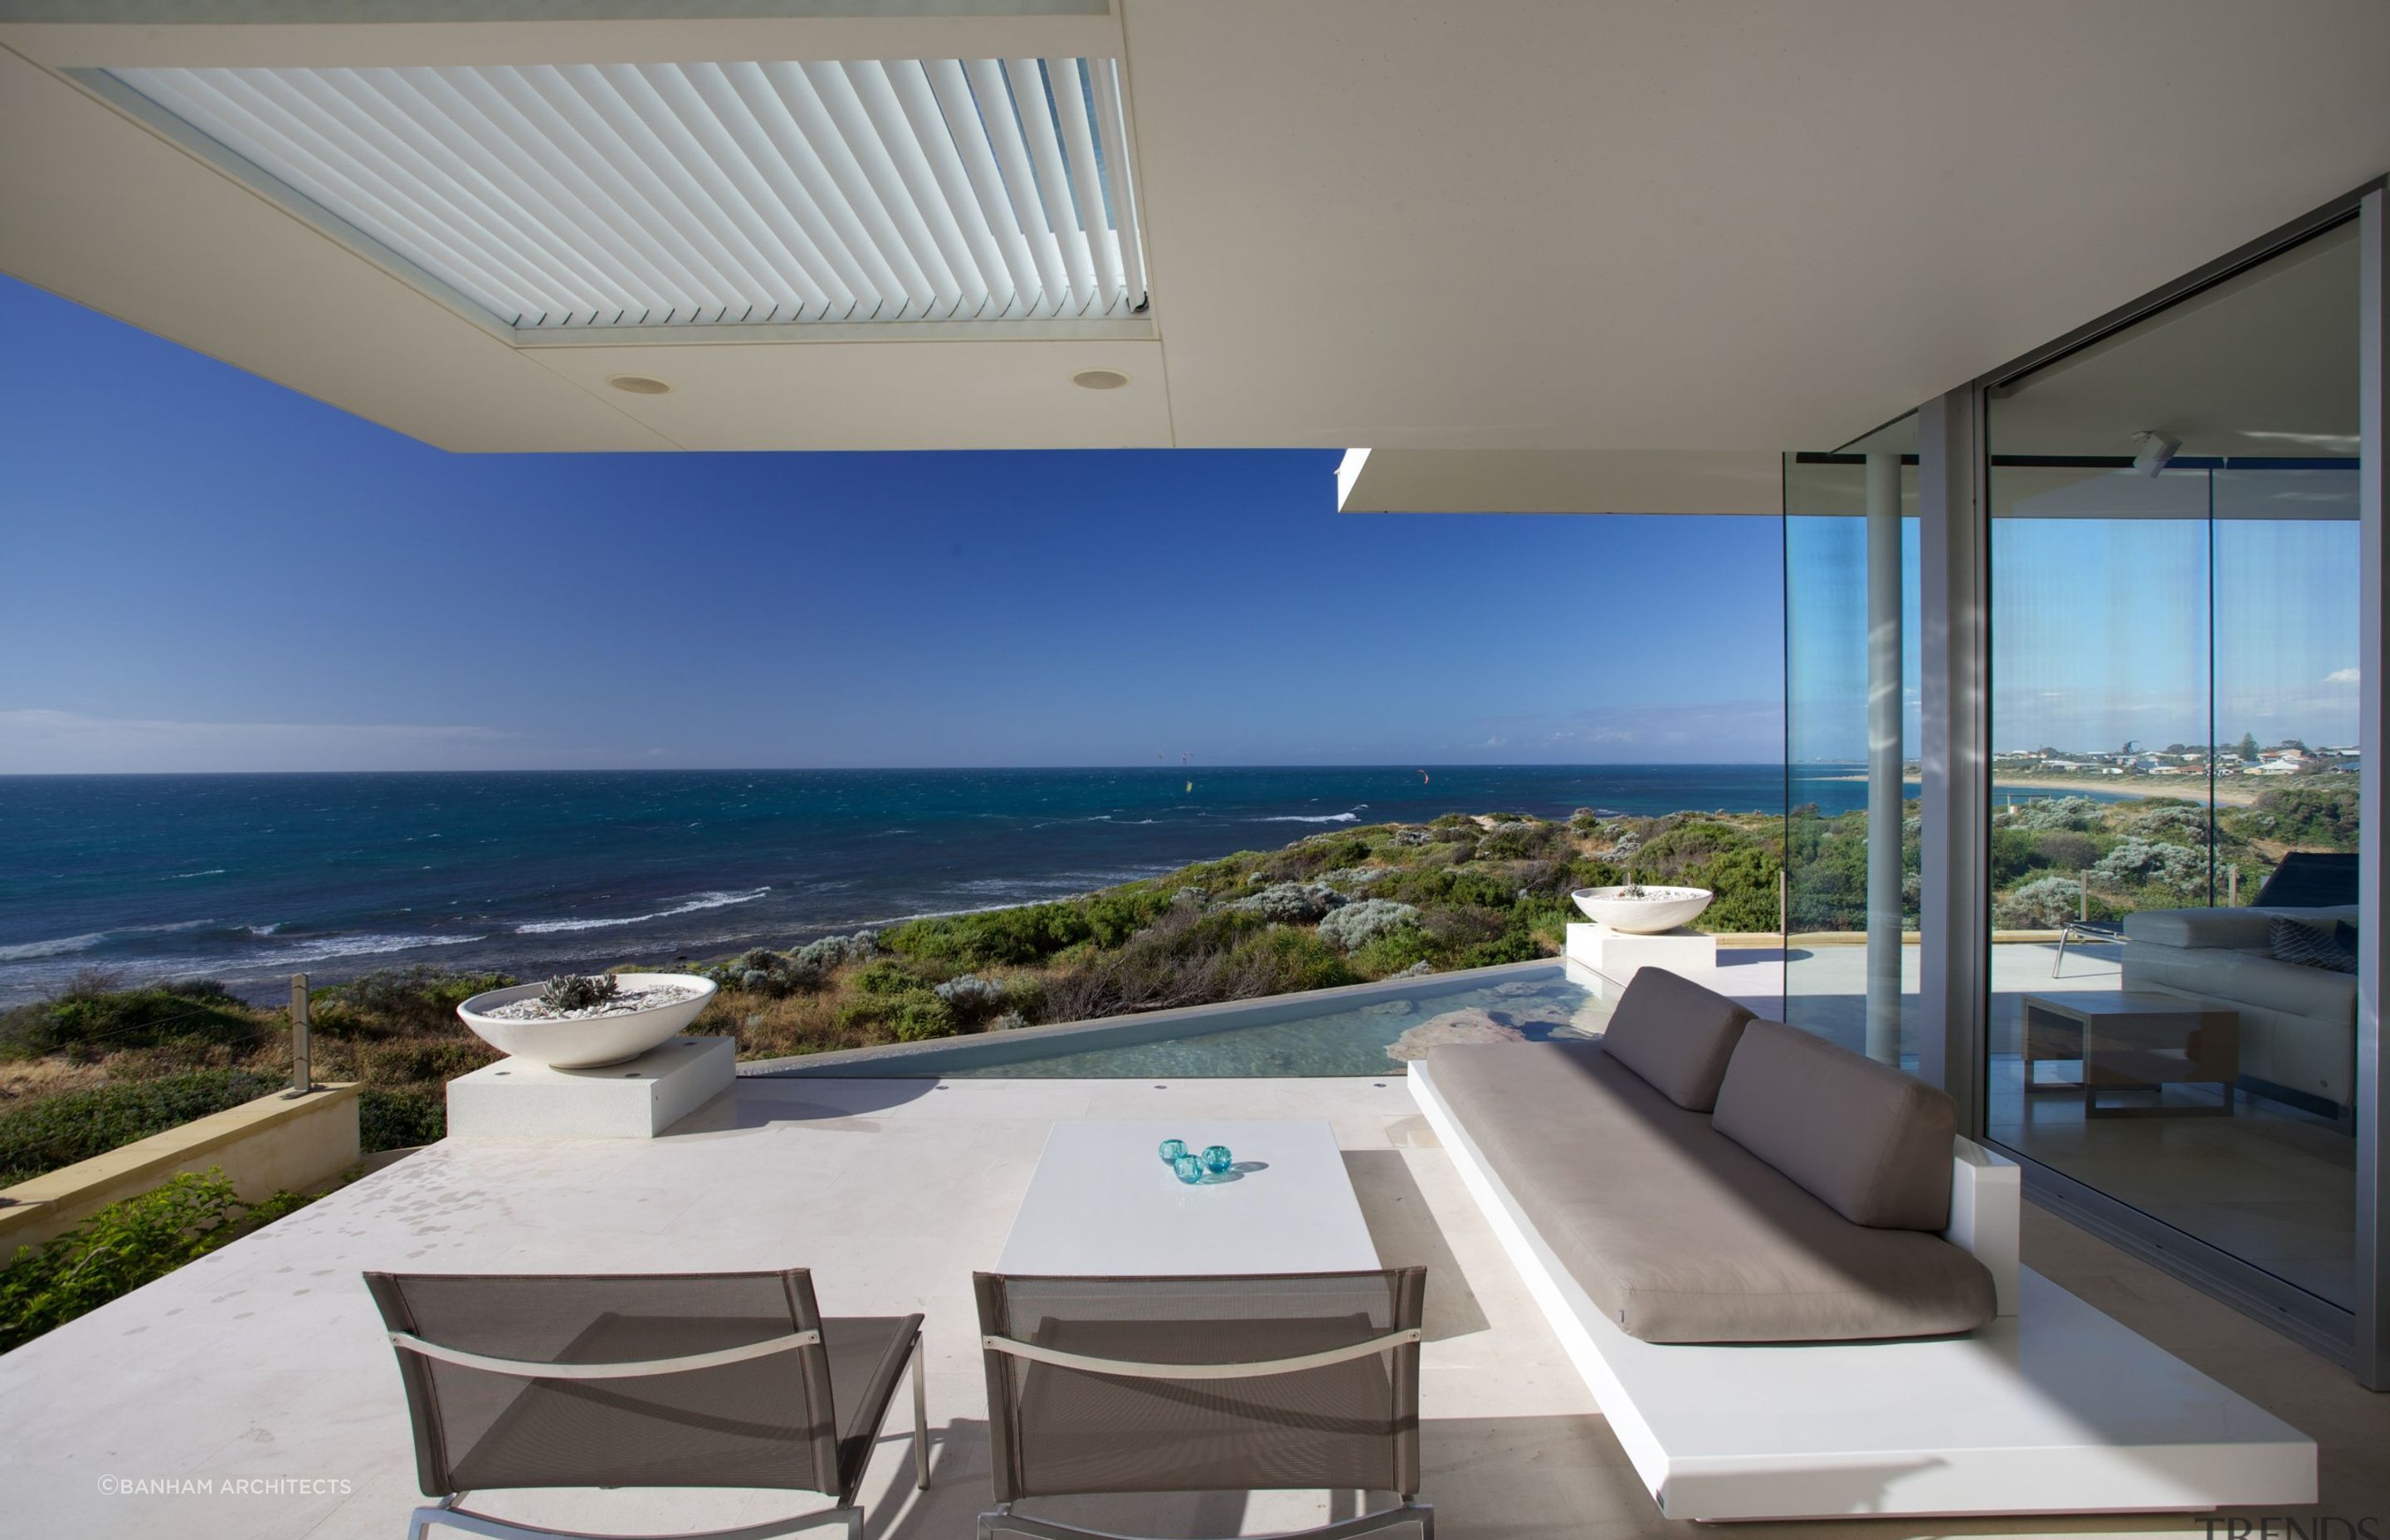 The stunning view can be enjoyed from the comfort of an outdoor lounger or the pool. Photography: Annetta Ashman.